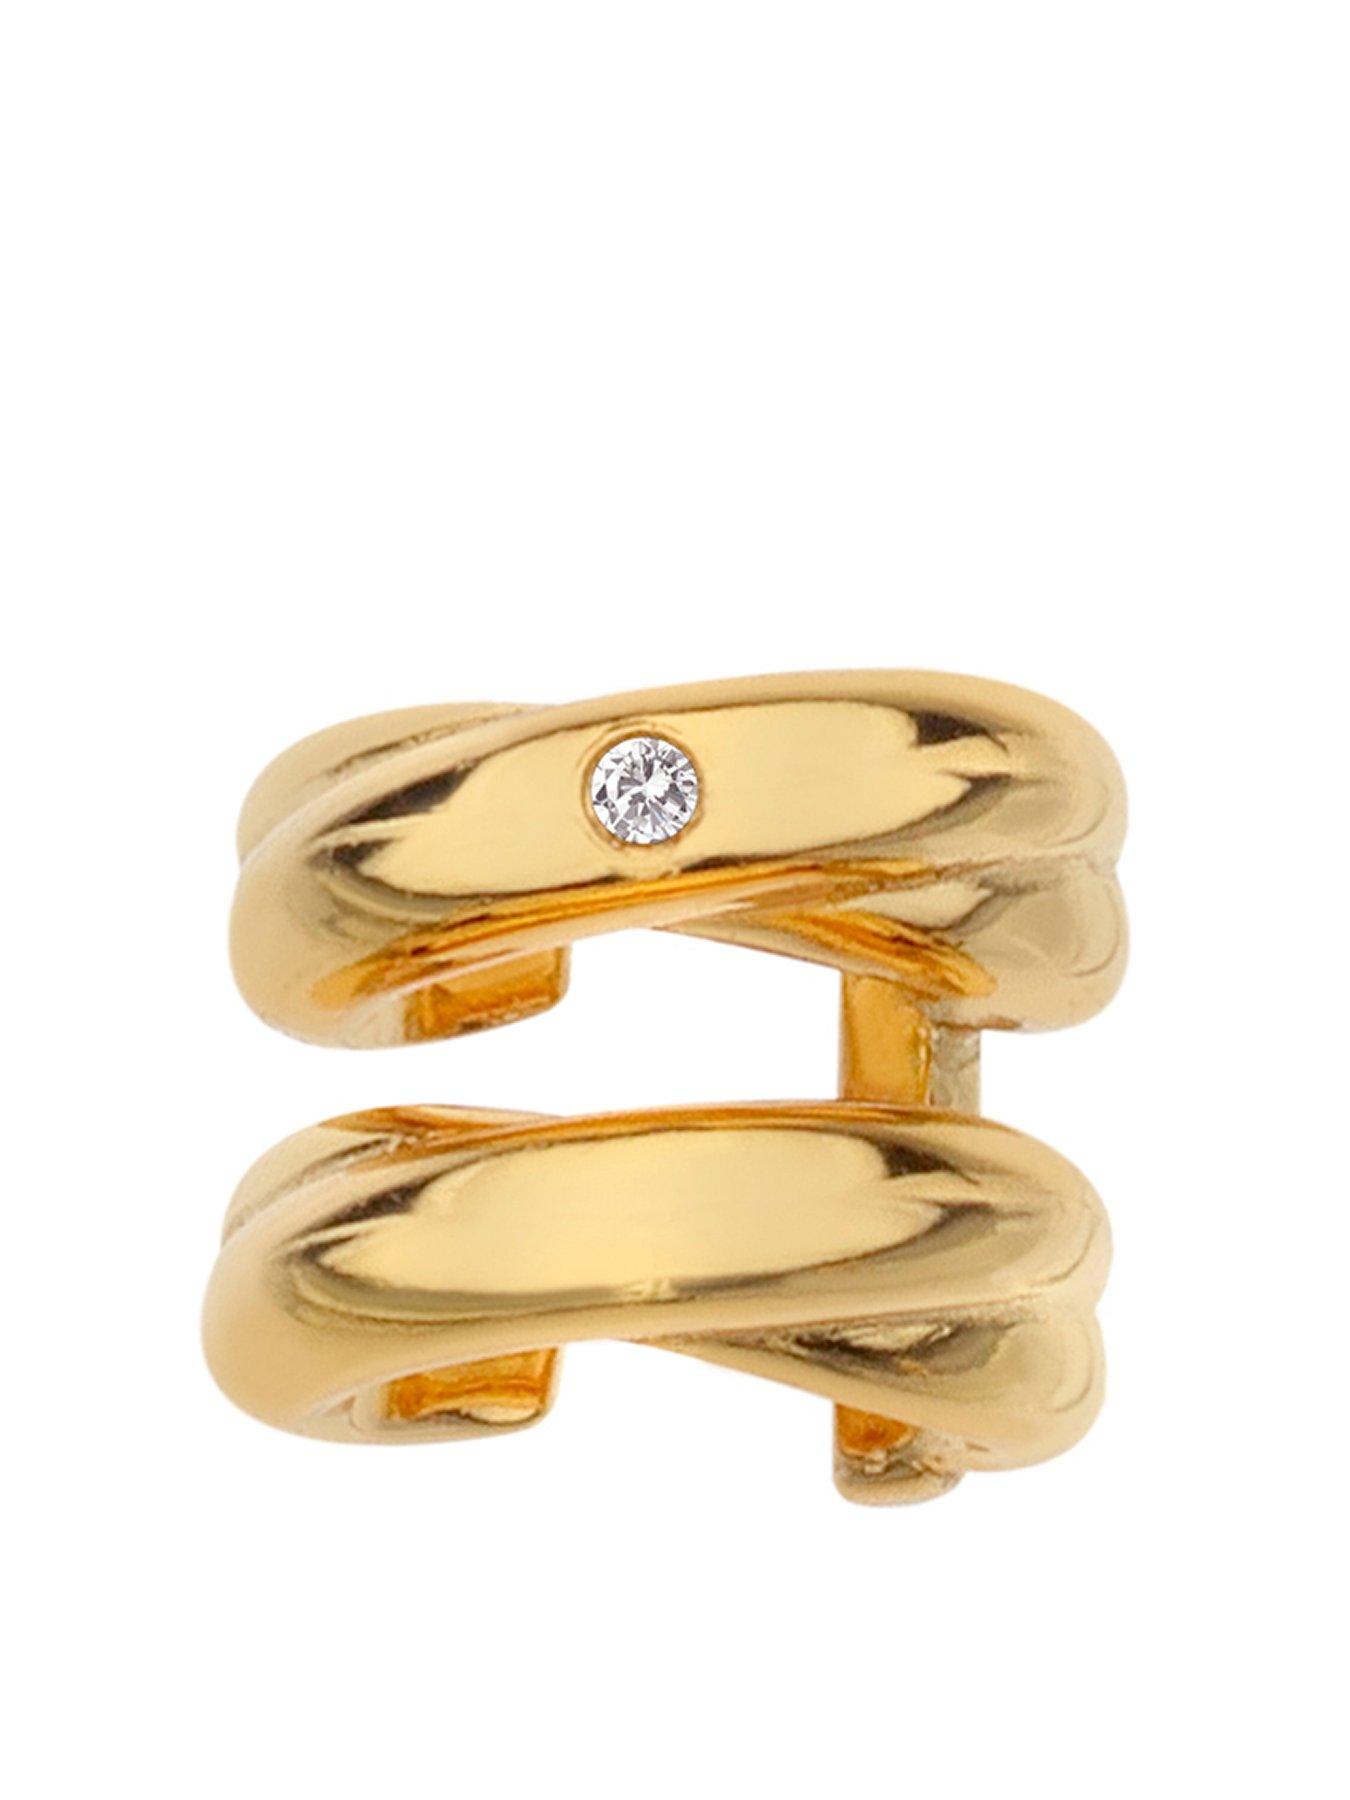 Details about   GENUINE 9ct Yellow or Rose or White Gold or Sterling Silver Weave Toe Ring  209 